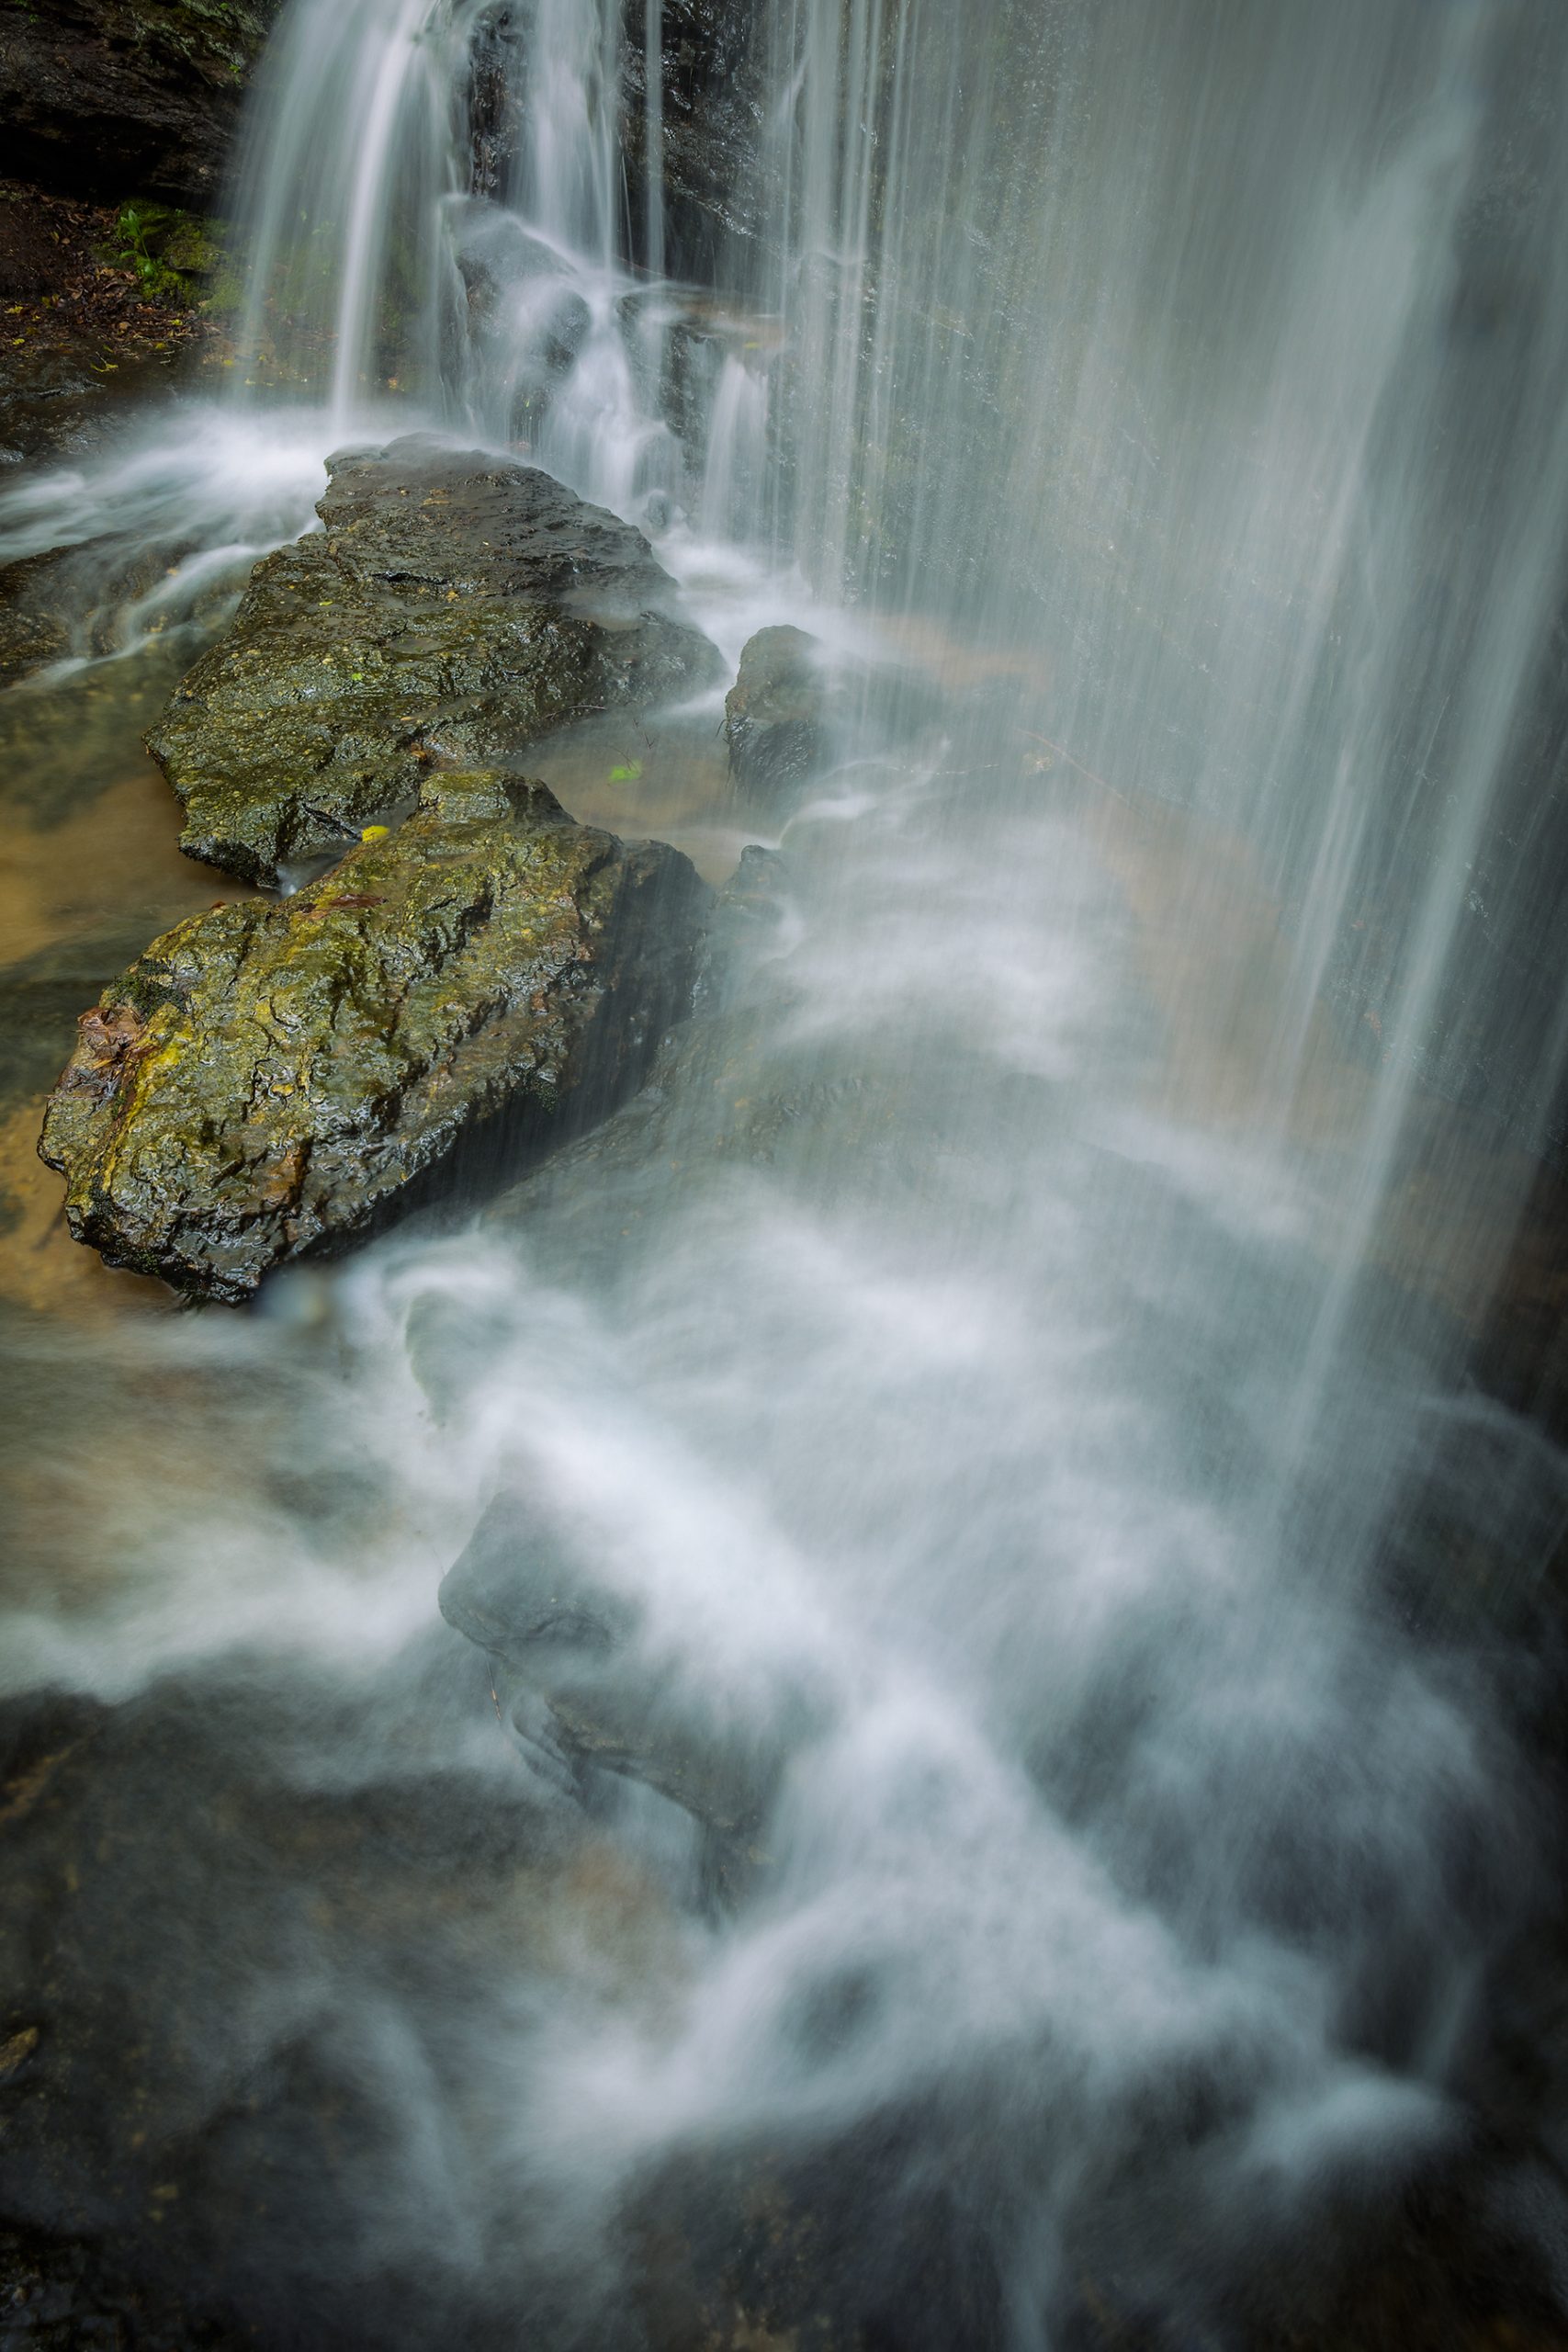 Located mere steps from Highway 276, three-tiered waterfalls within Wildcat Wayside Park give travelers an intimate connection with nature’s waters before continuing on their journeys. 